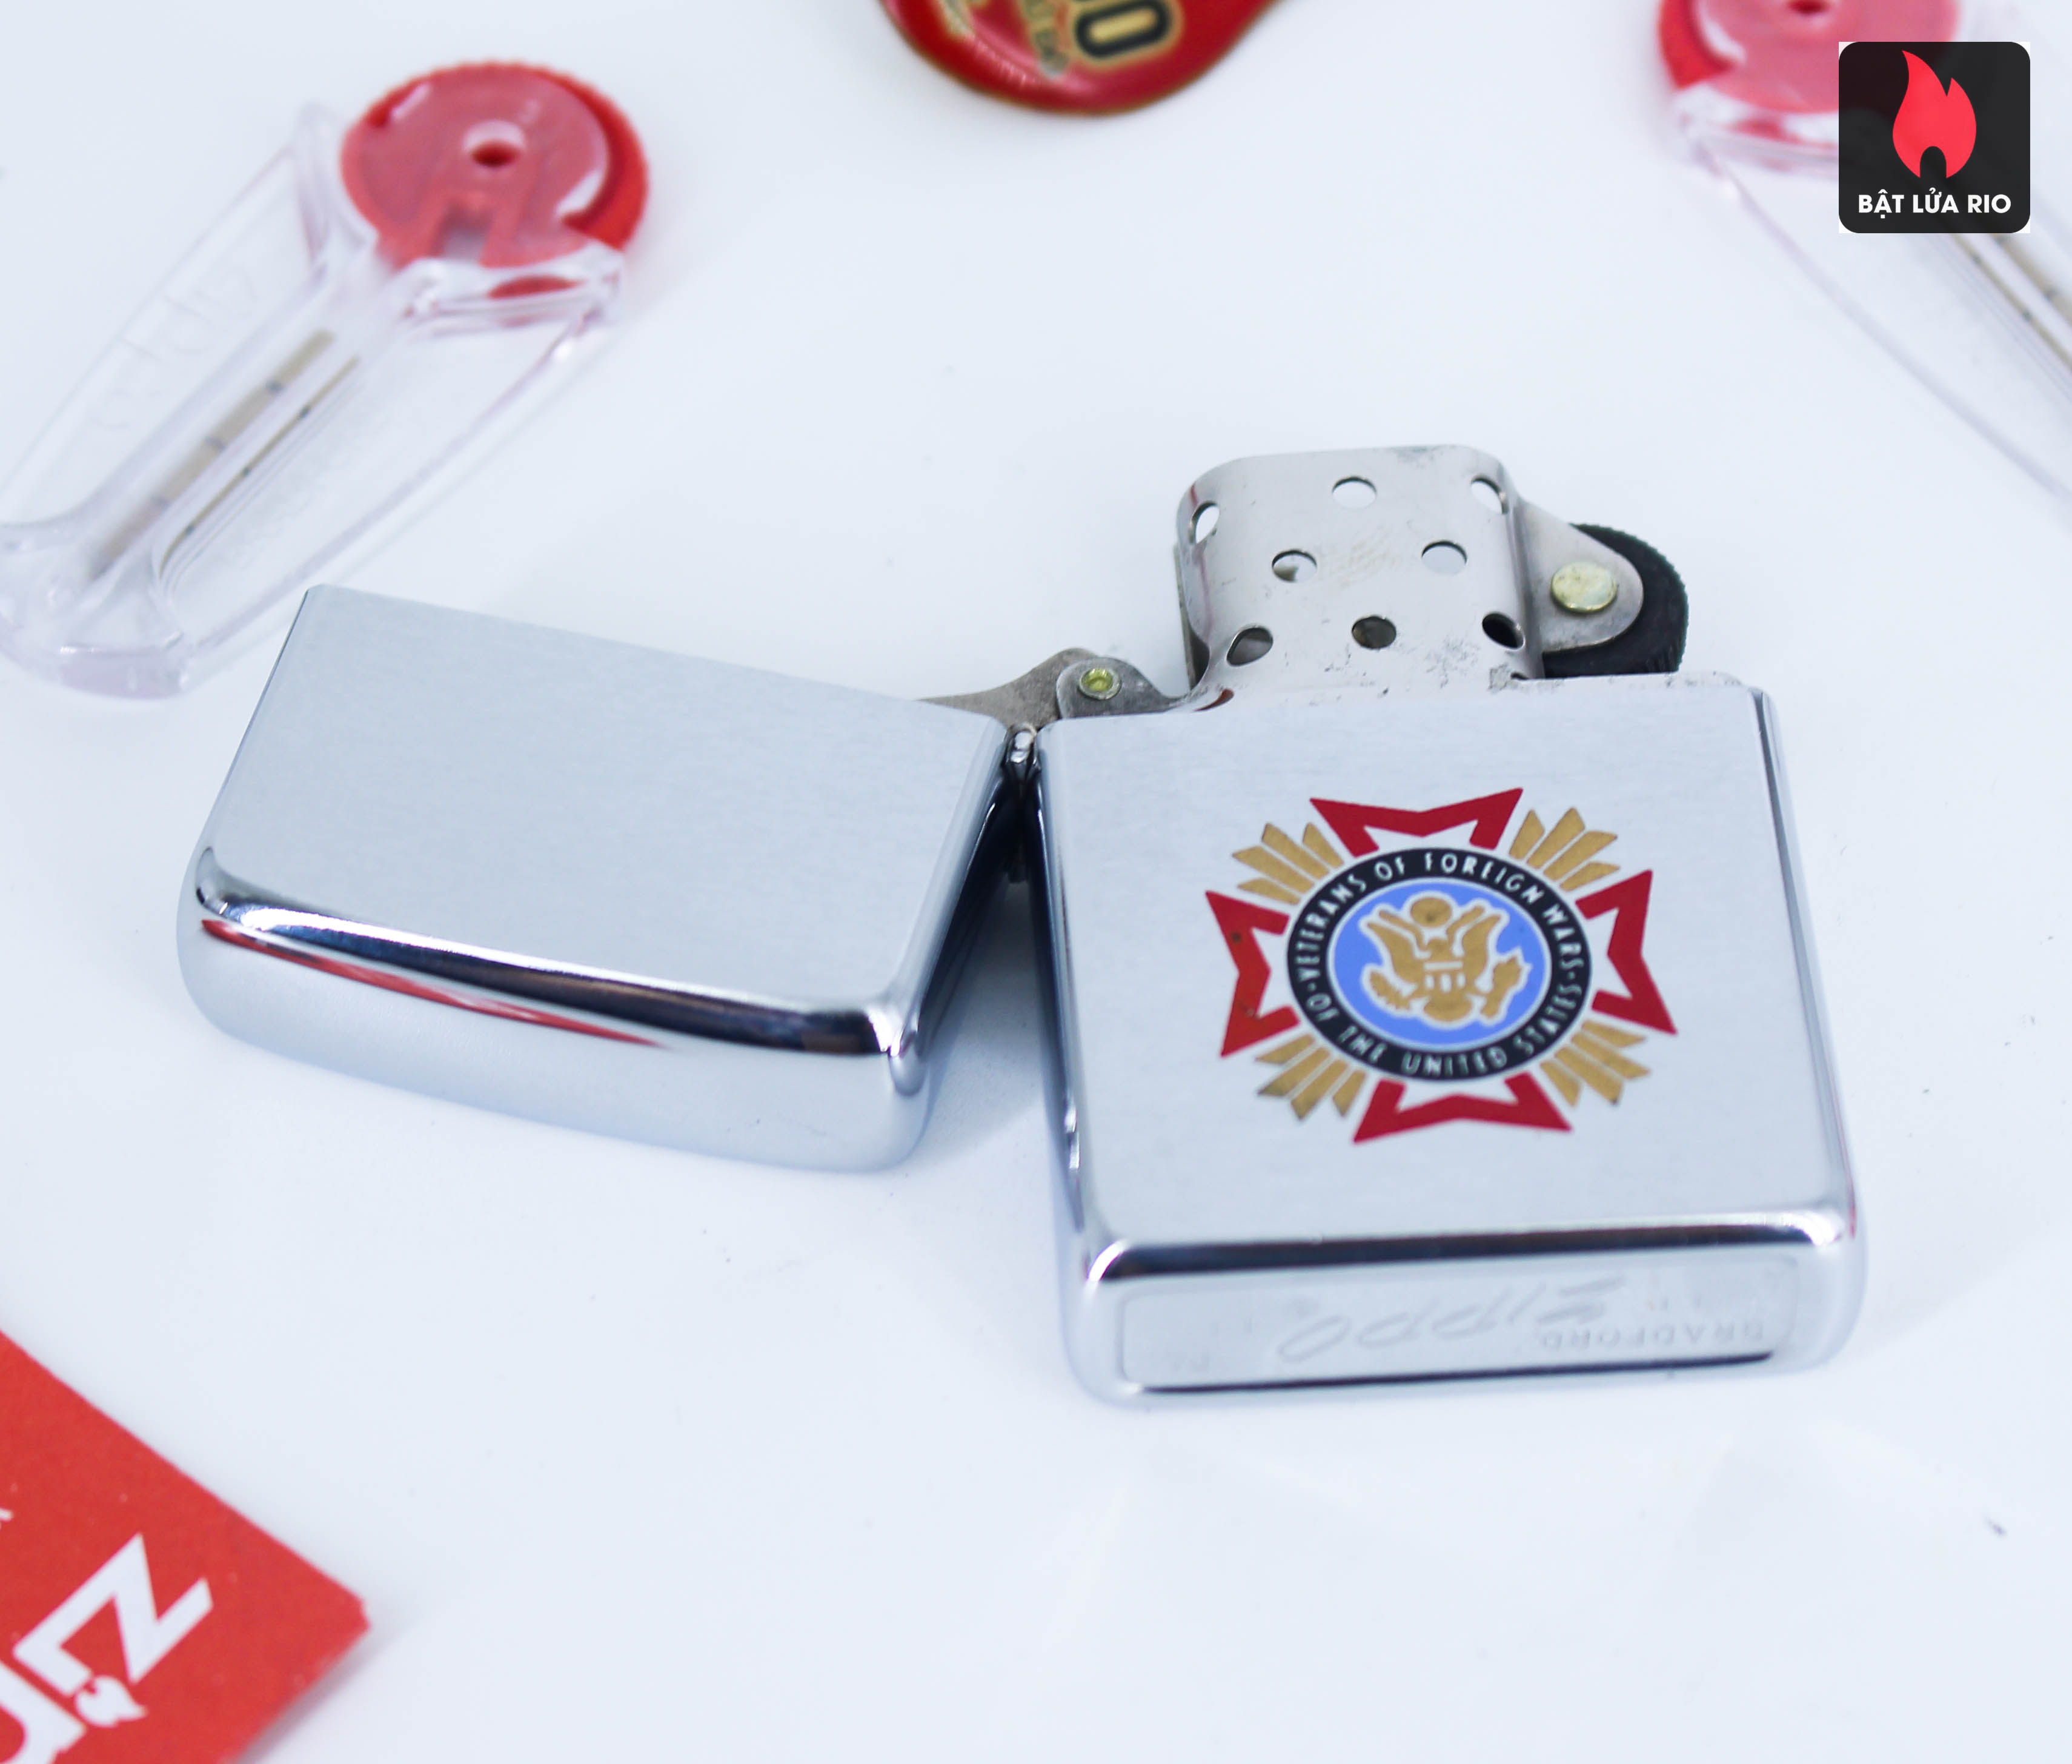 ZIPPO XƯA 1970 – VETERANS OF FOREIGN WARS